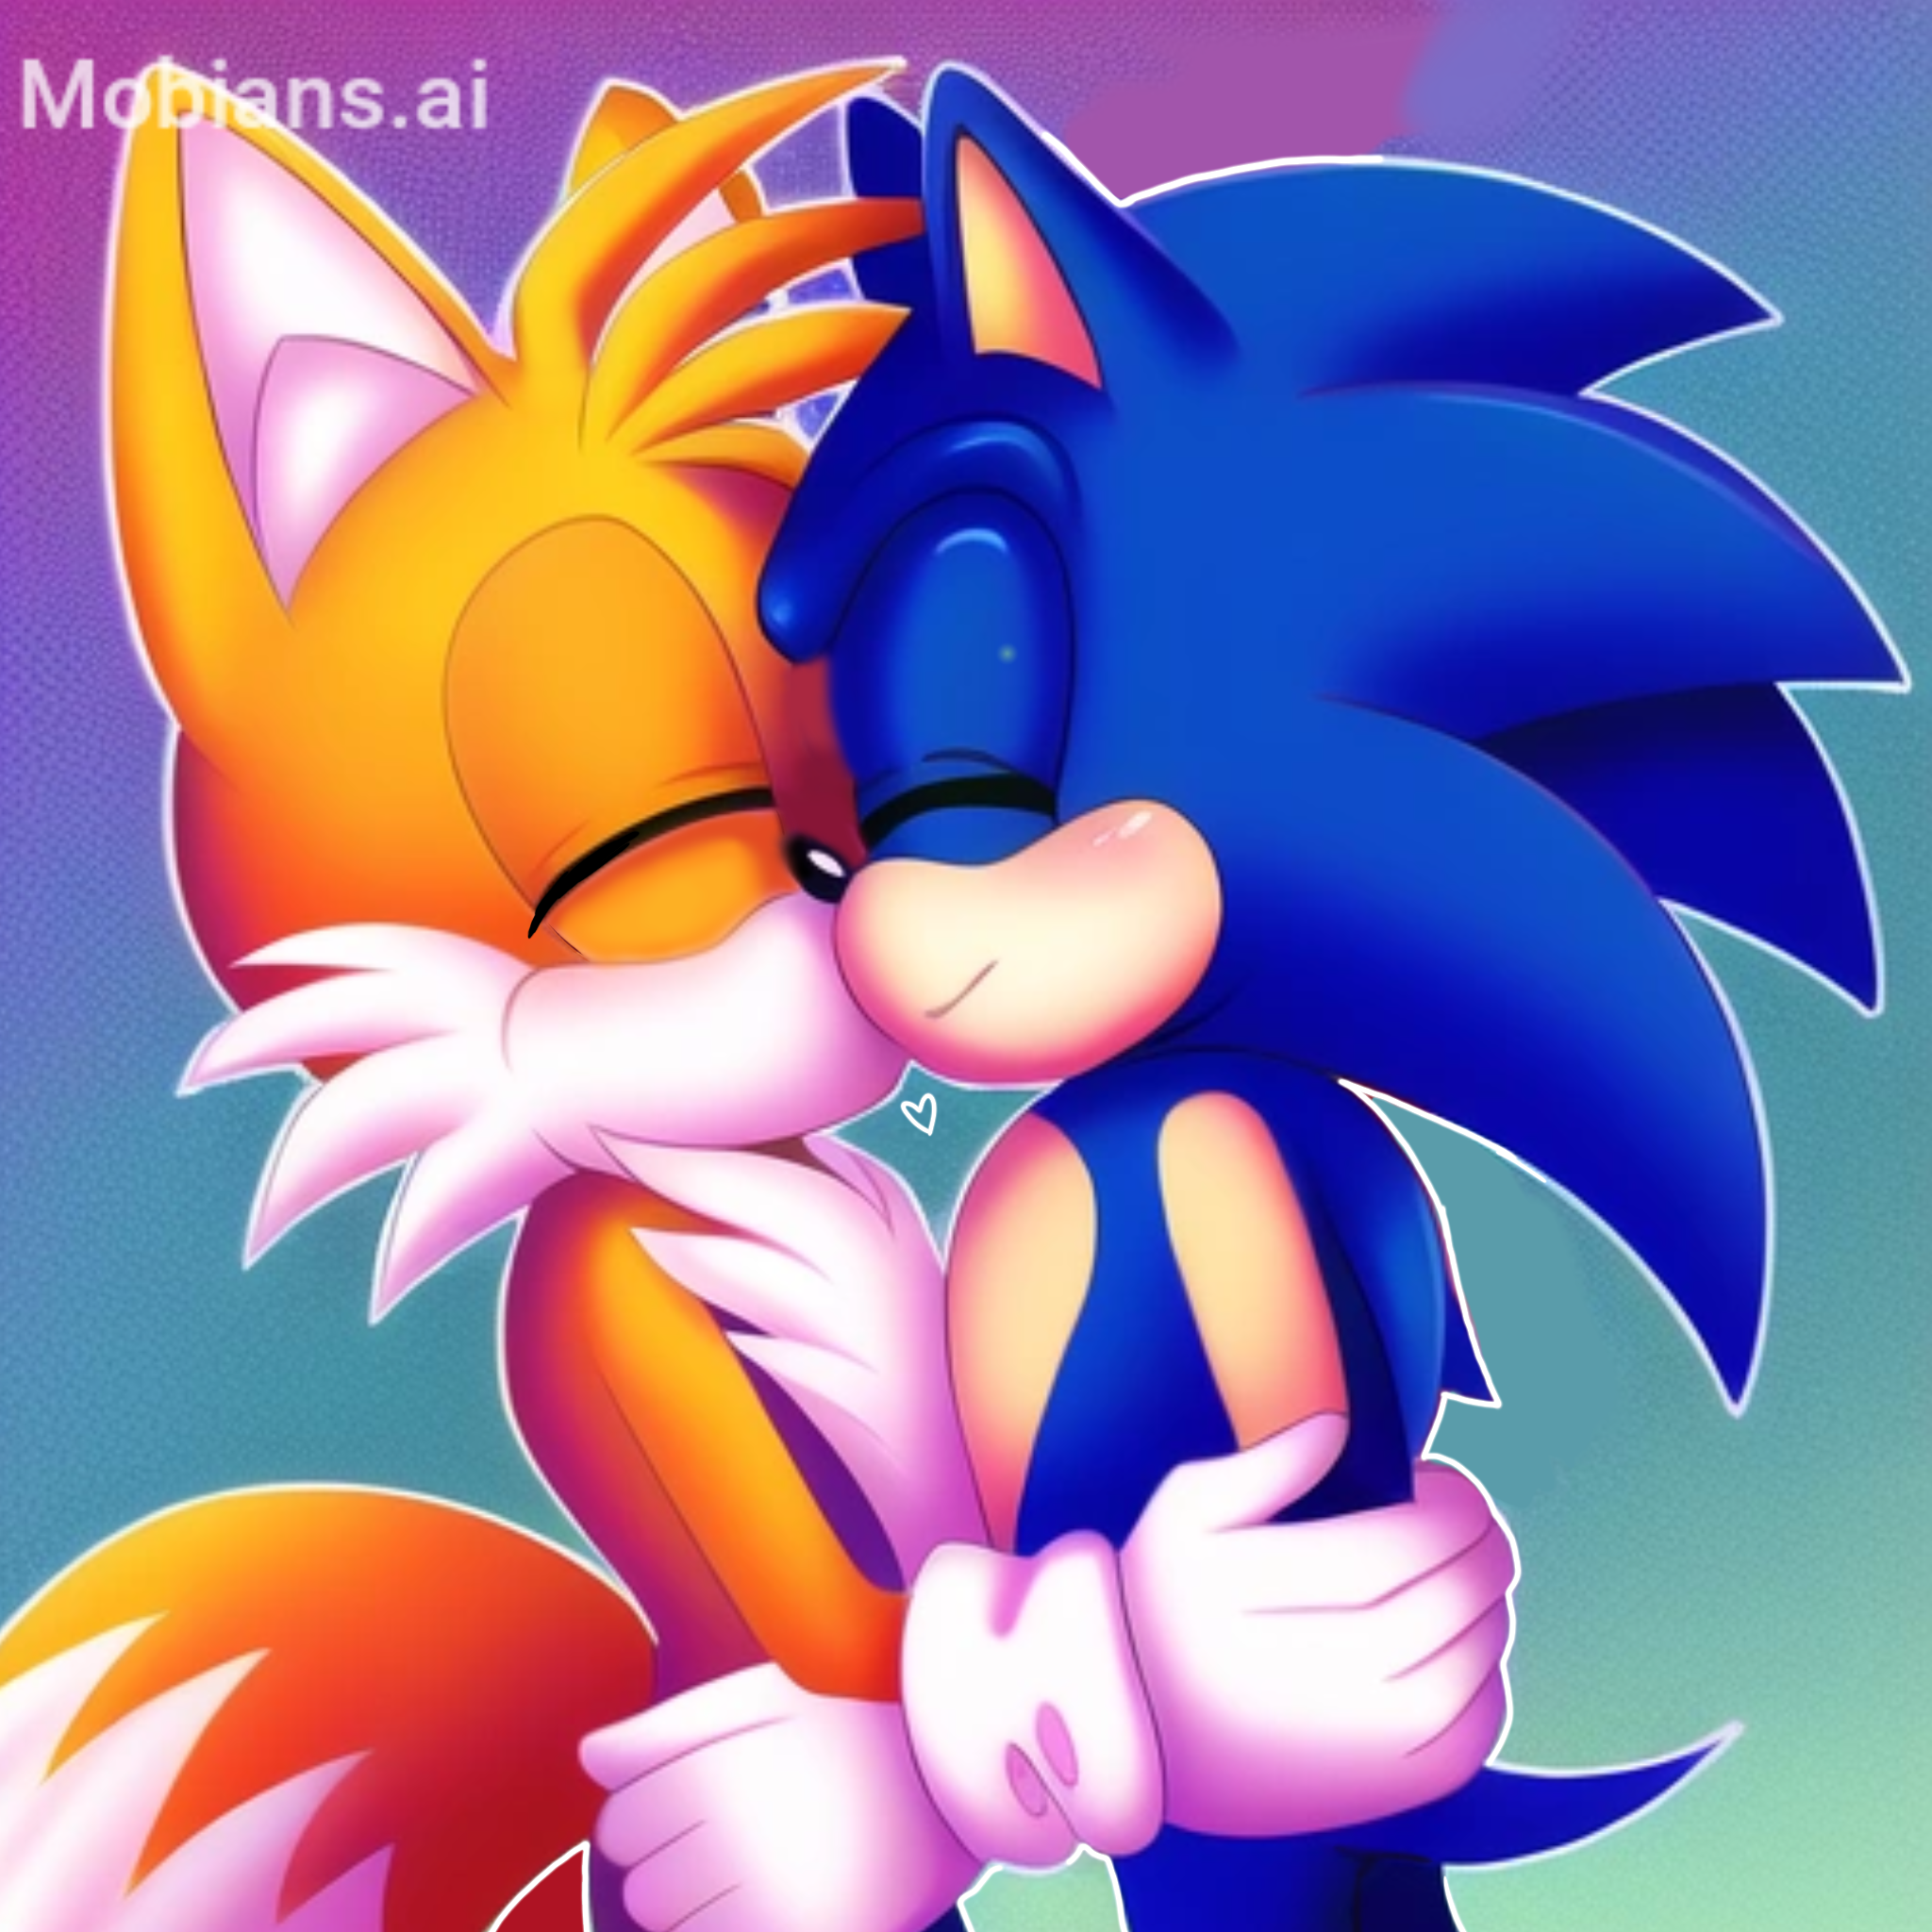 Sonic Duo - They Kiss - Single Panel.png by Jaden The Hedgehog 